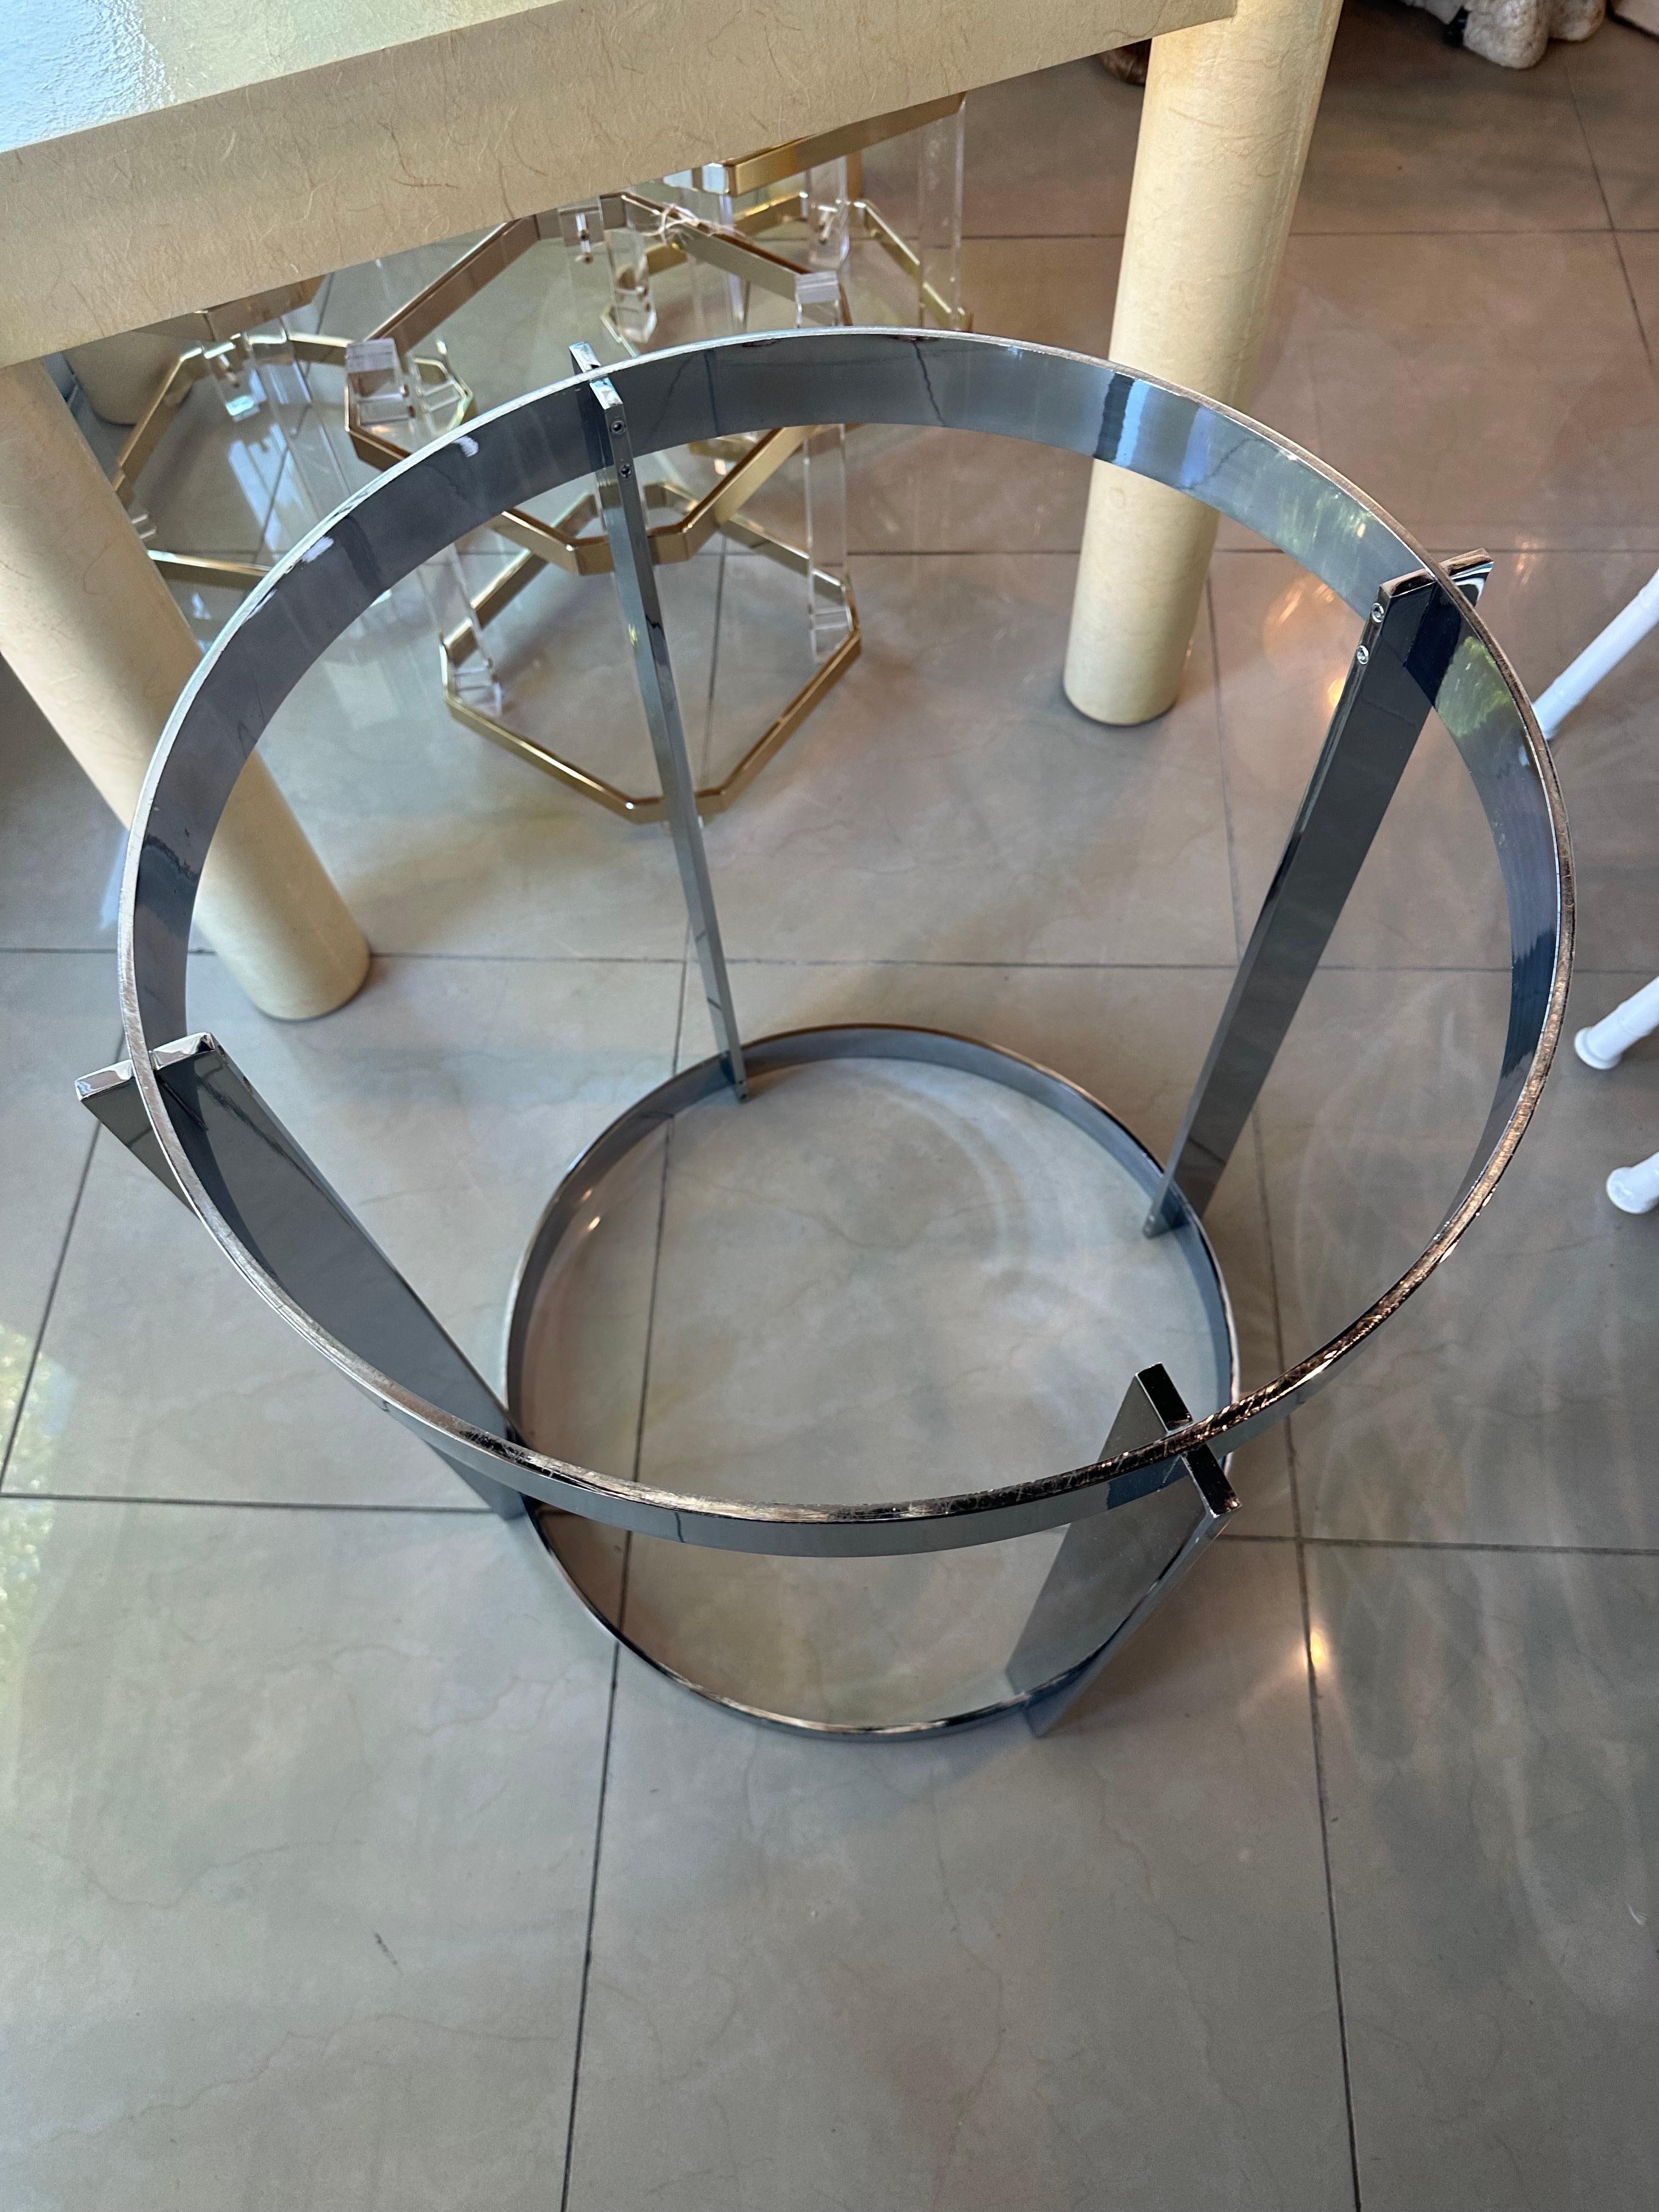 Vintage 1970s Italian Modern Chrome Dining Center Entry Table Round Base In Good Condition For Sale In West Palm Beach, FL